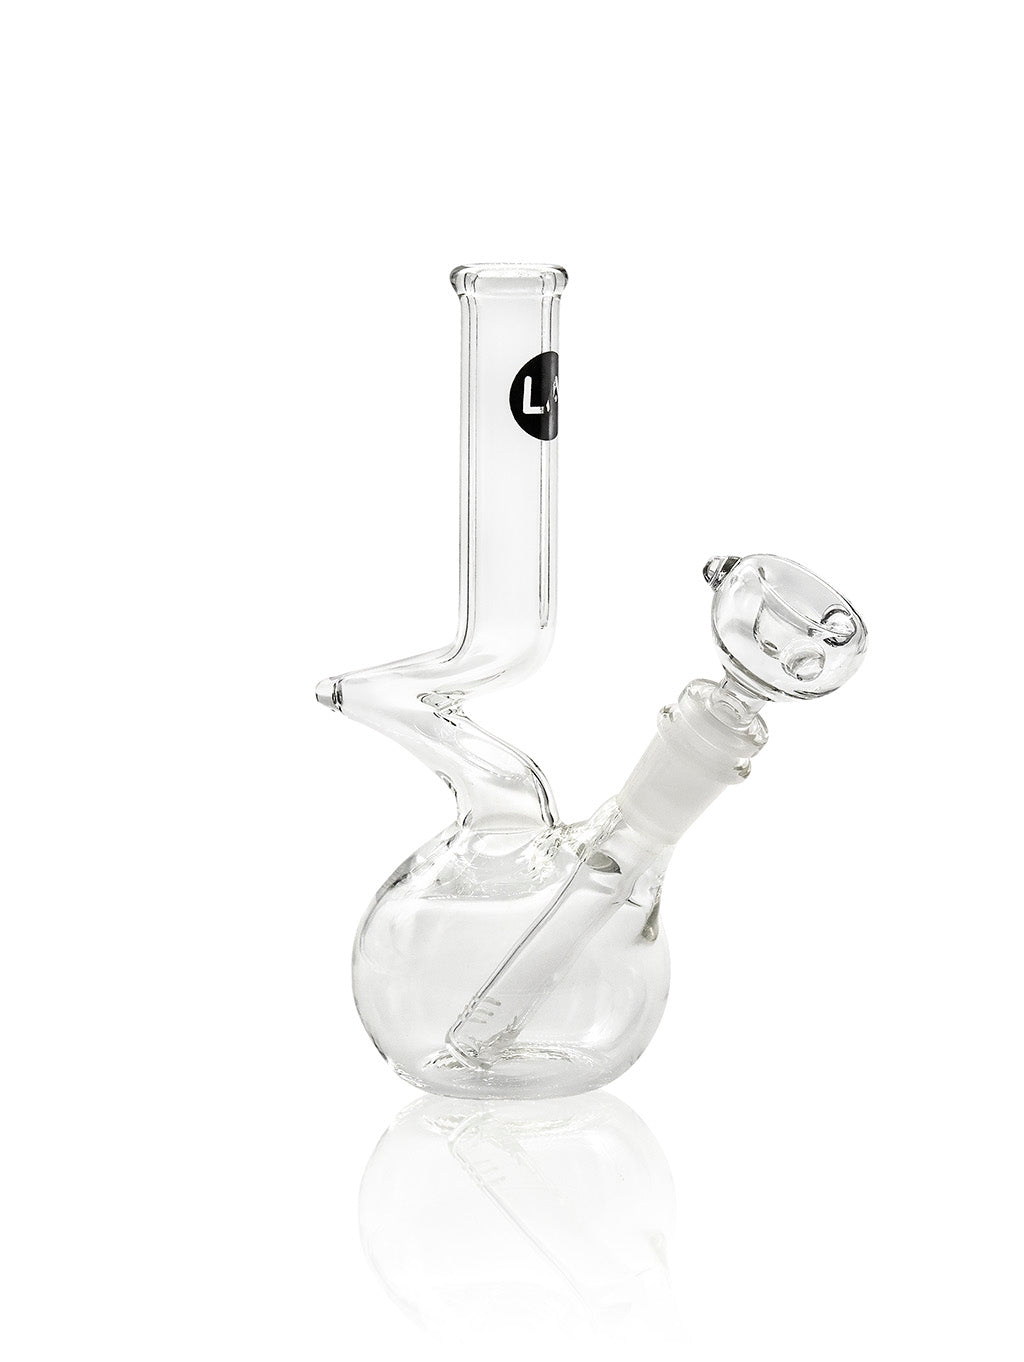 LA Pipes "The Zong" Compact Zong Style Bong with 45 Degree Joint Angle, Front View